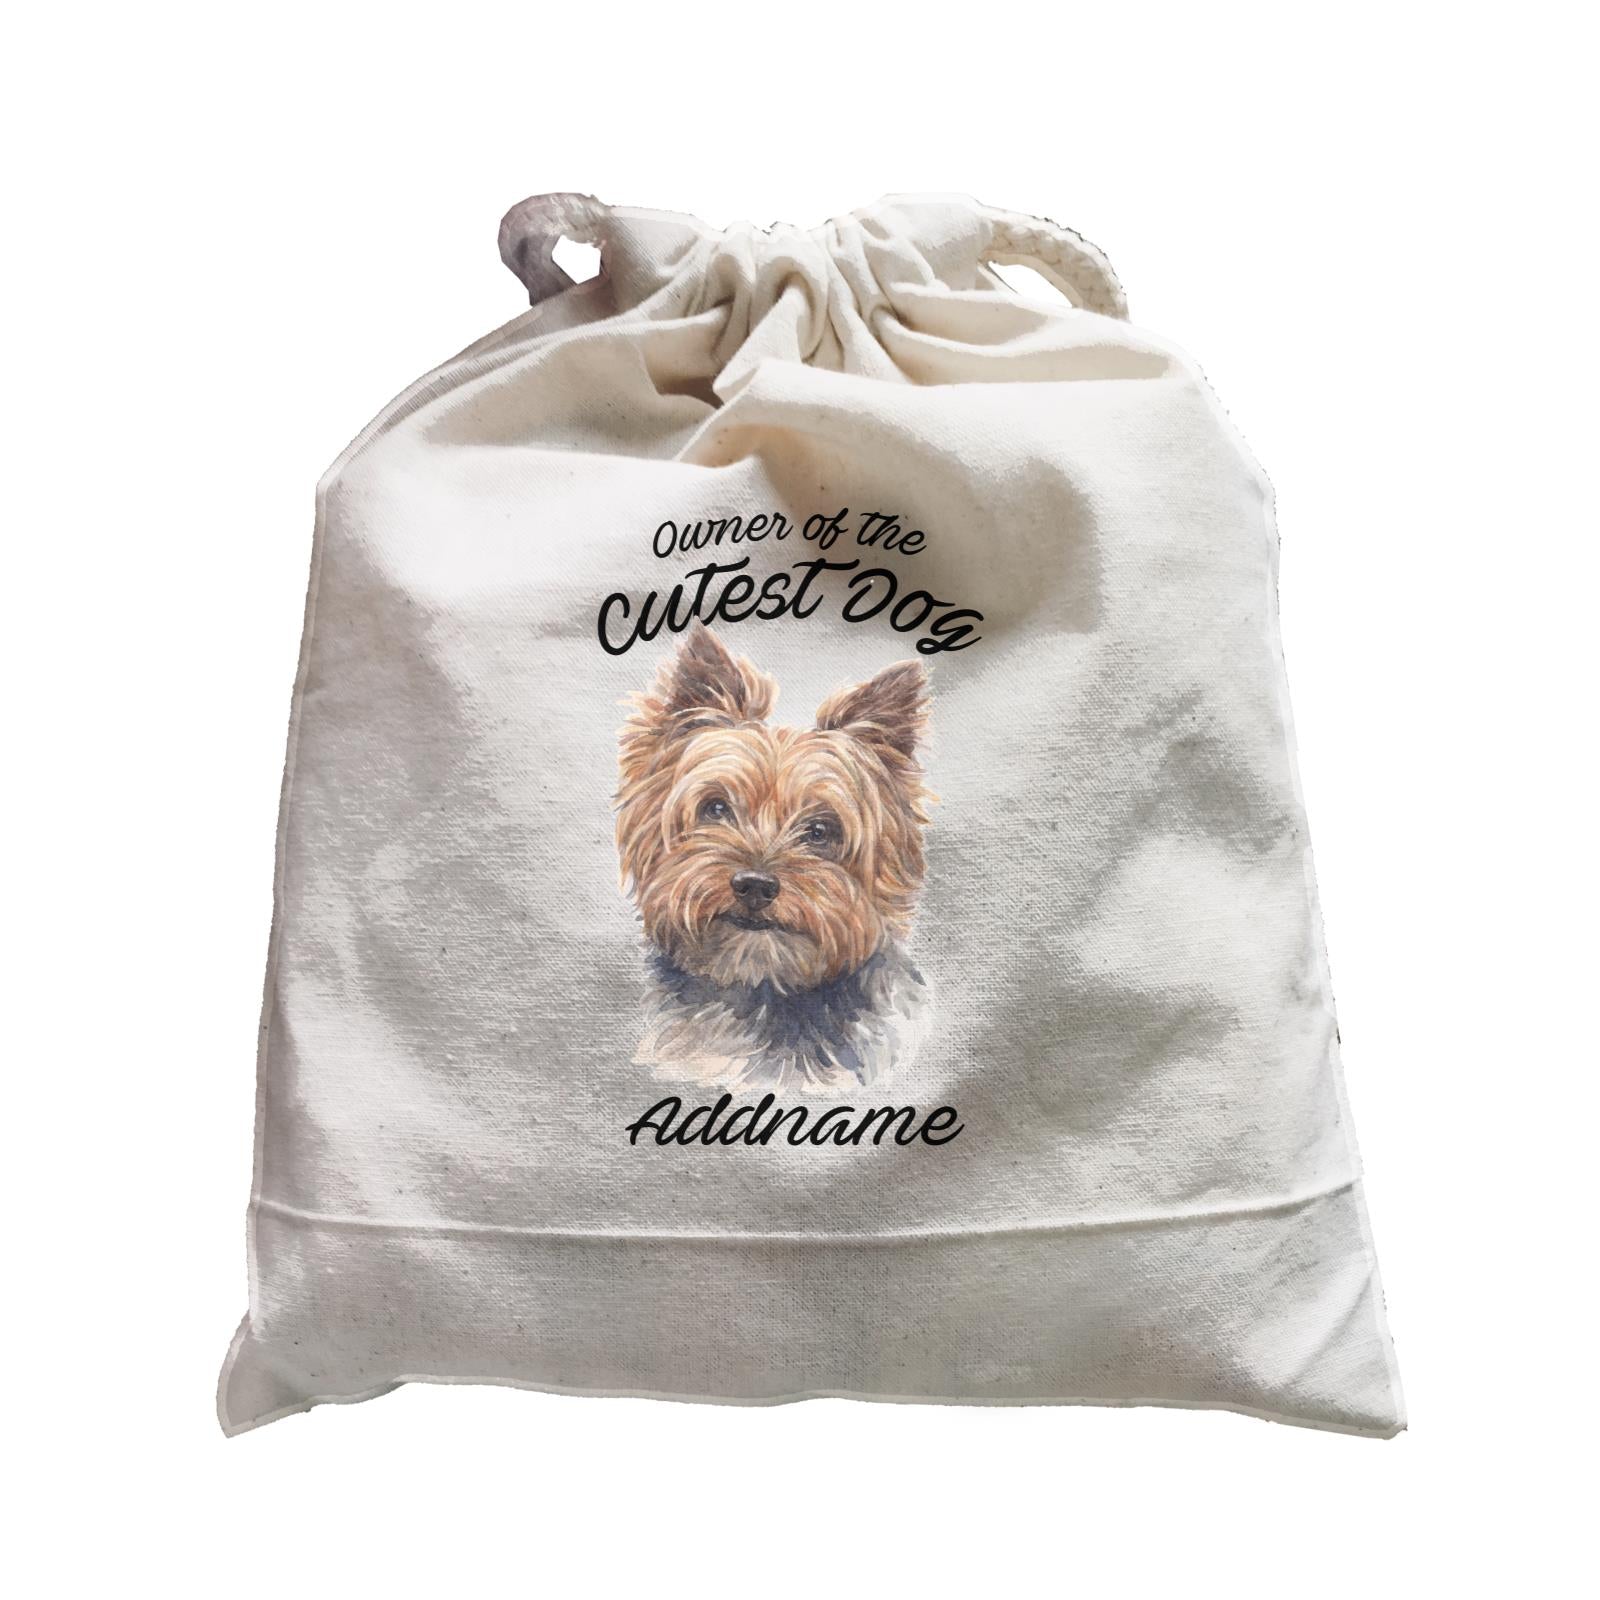 Watercolor Dog Owner Of The Cutest Dog Yorkshire Terrier Addname Satchel